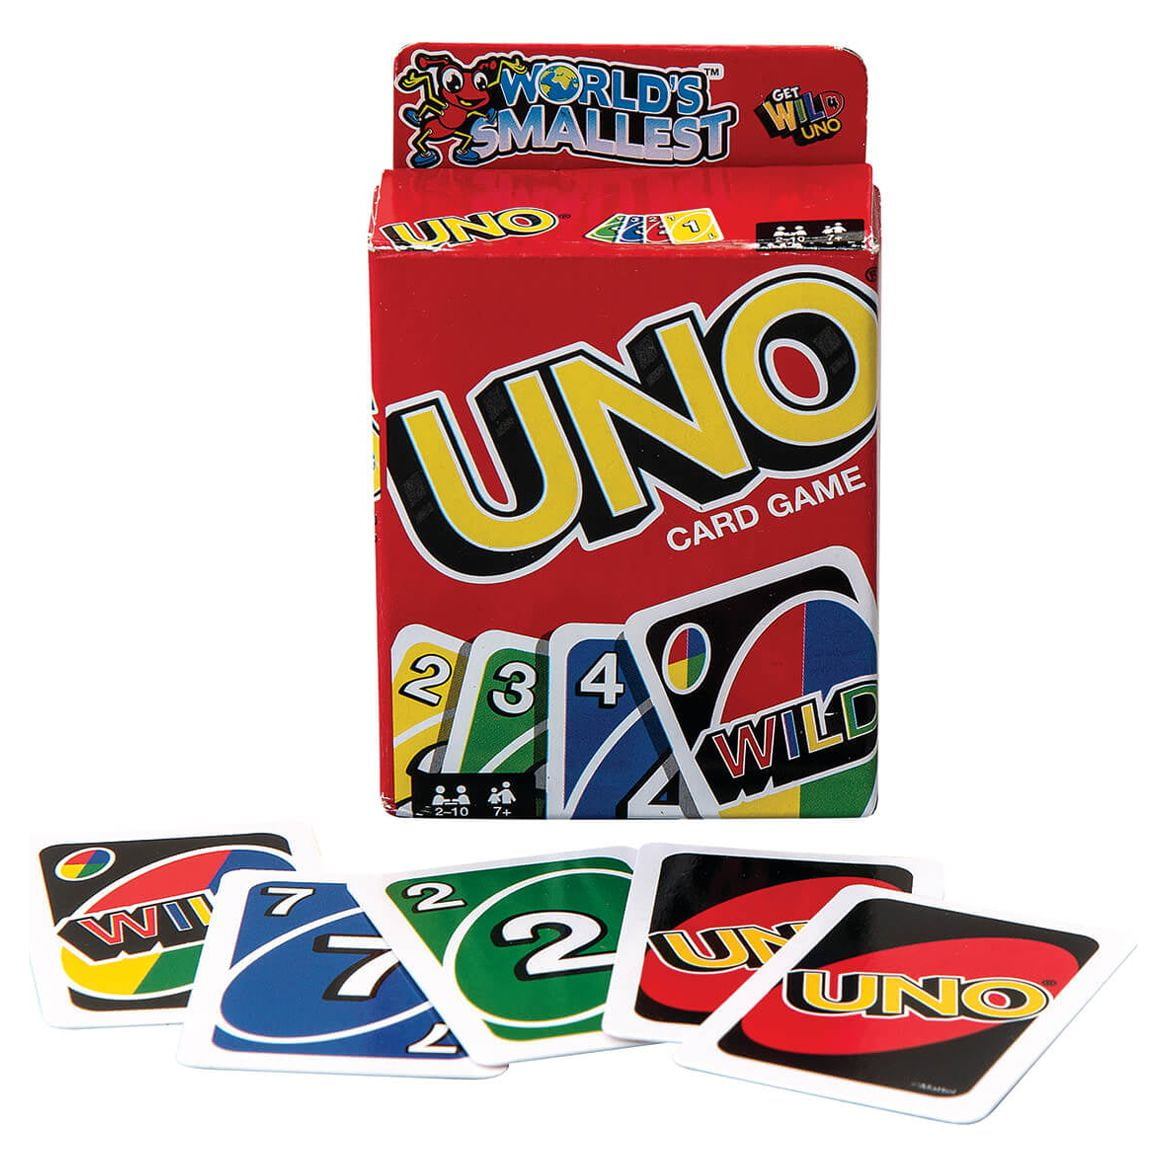 World's Smallest Uno Card Game by alliance Entertainment 